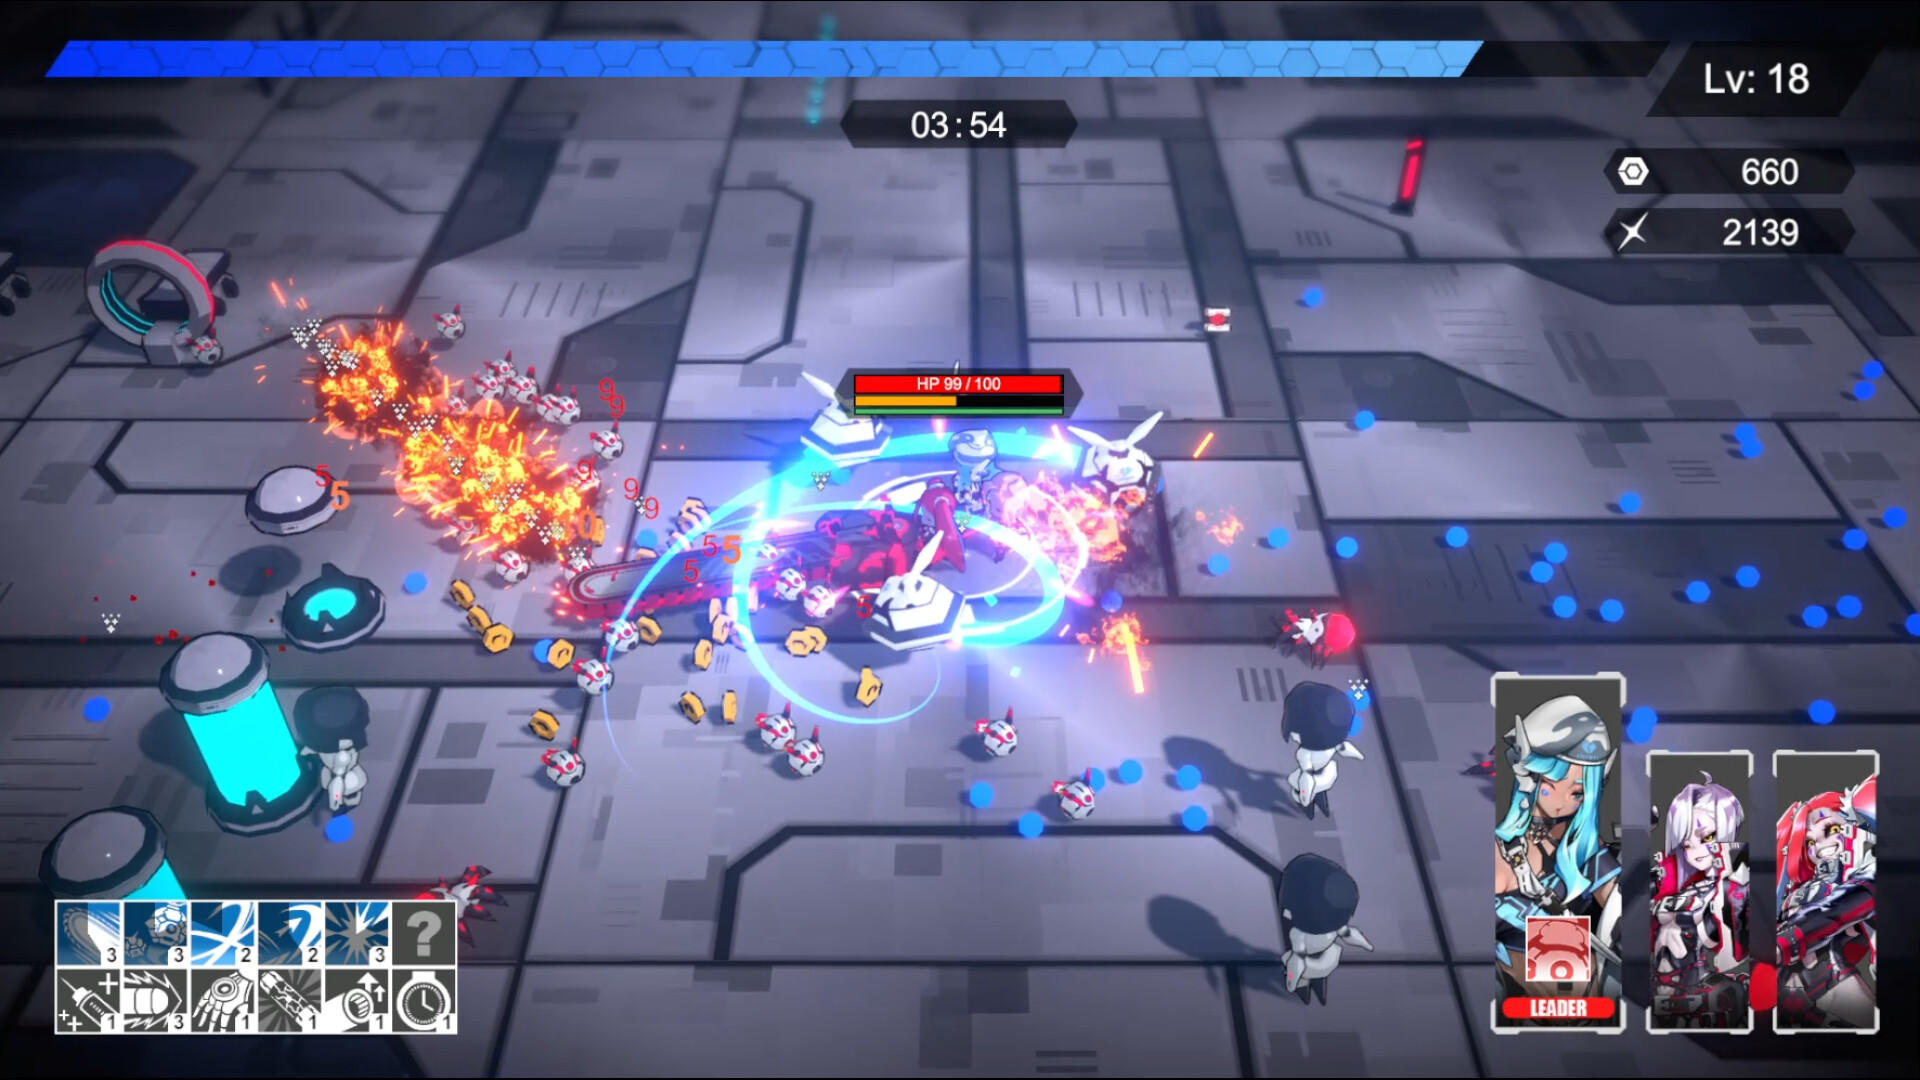 Valkyrie Squad: Siege Breakers screenshot game